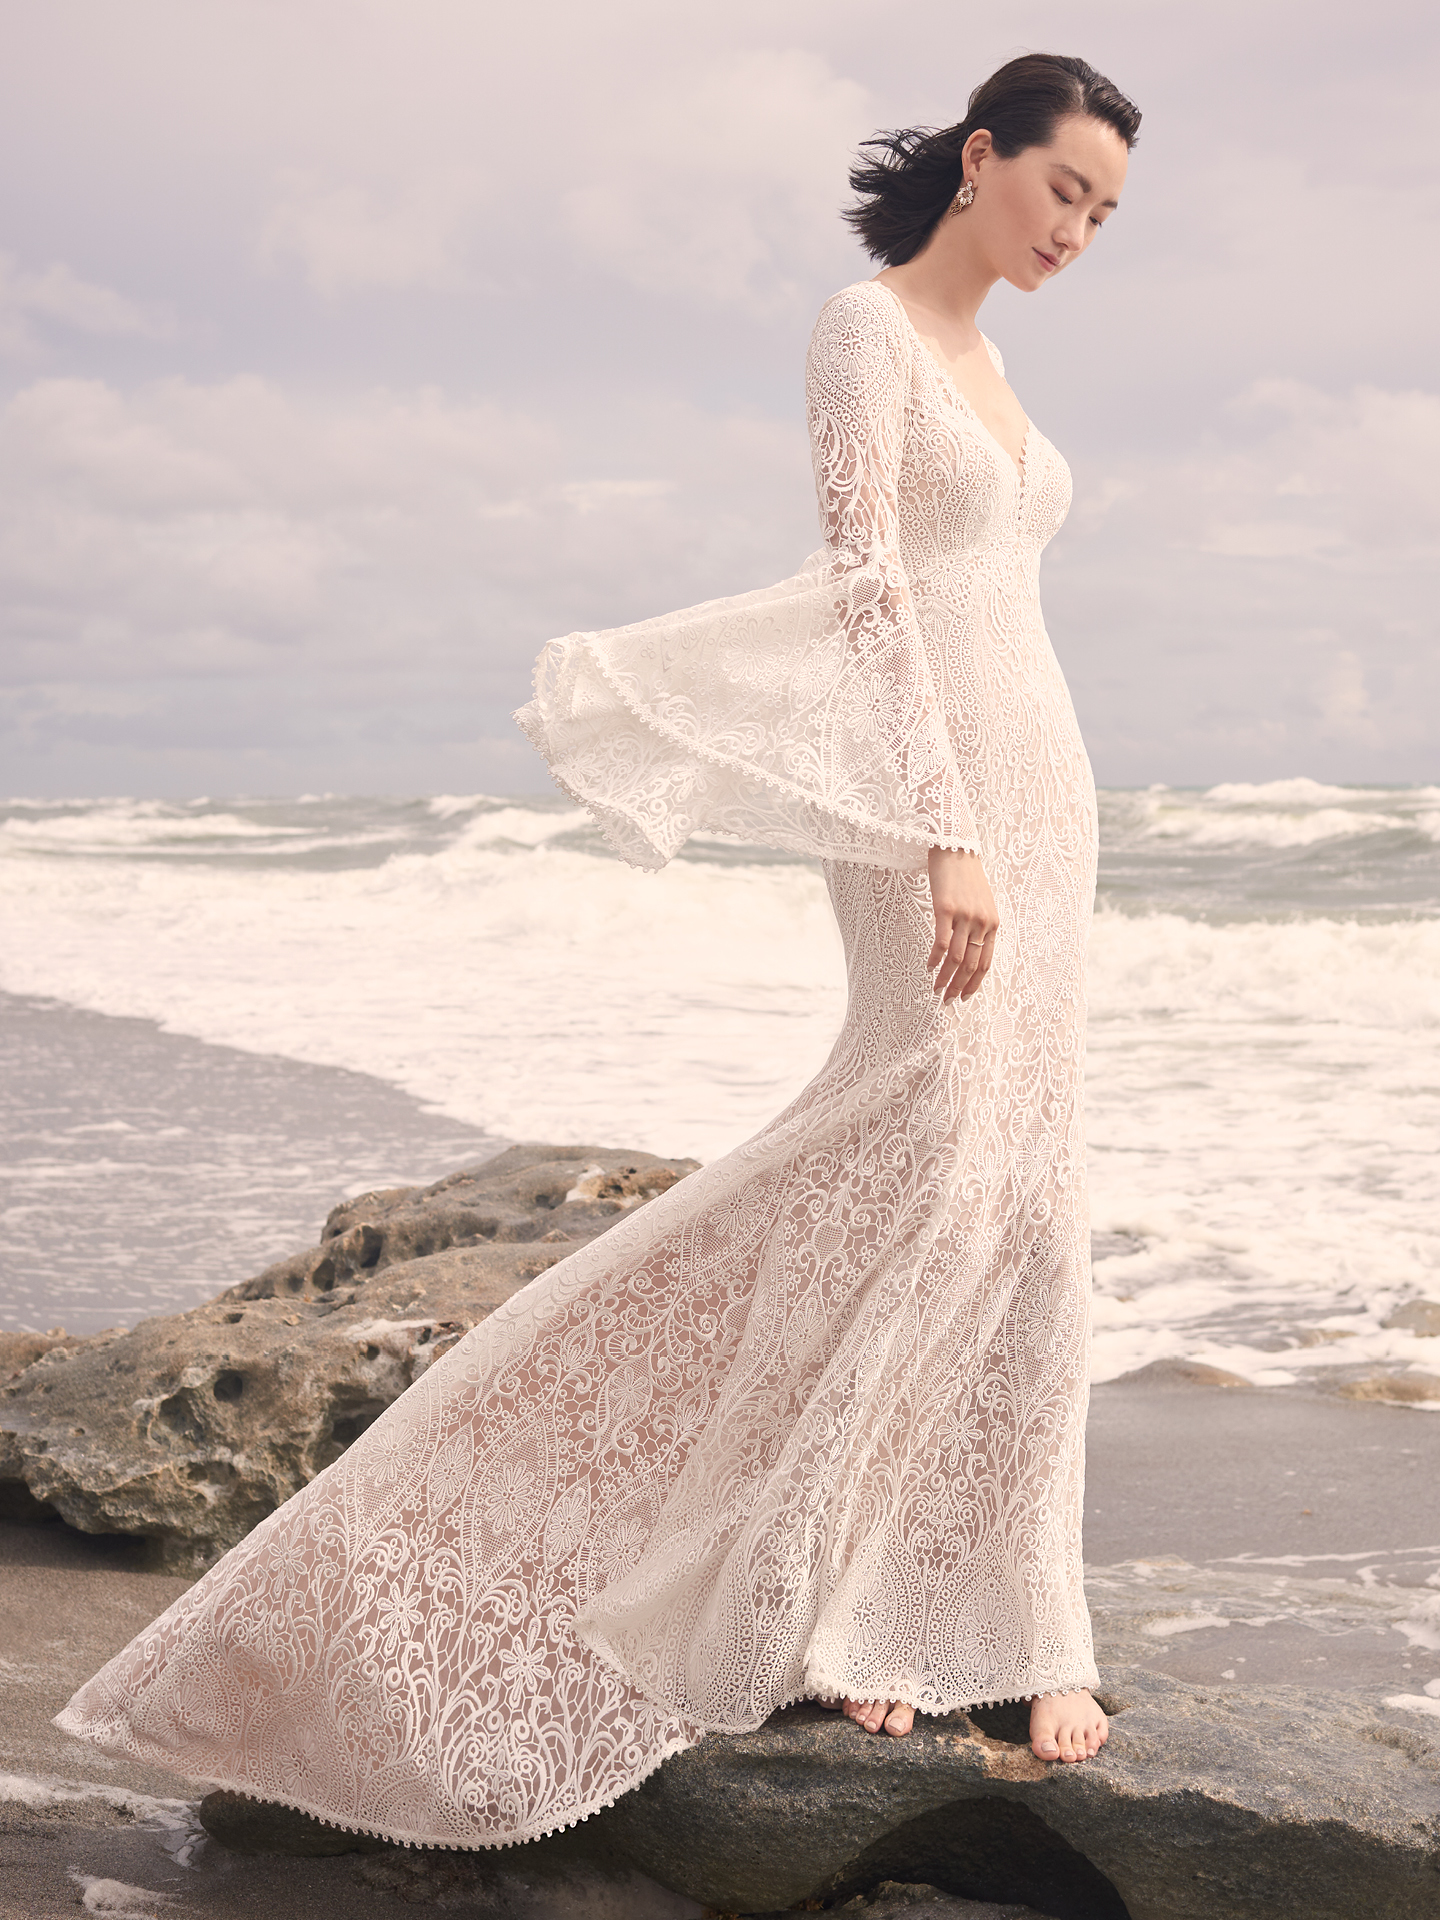 Model wearing Chic and Unique Boho Wedding Dress Benson by Sottero and Midgley on the beach